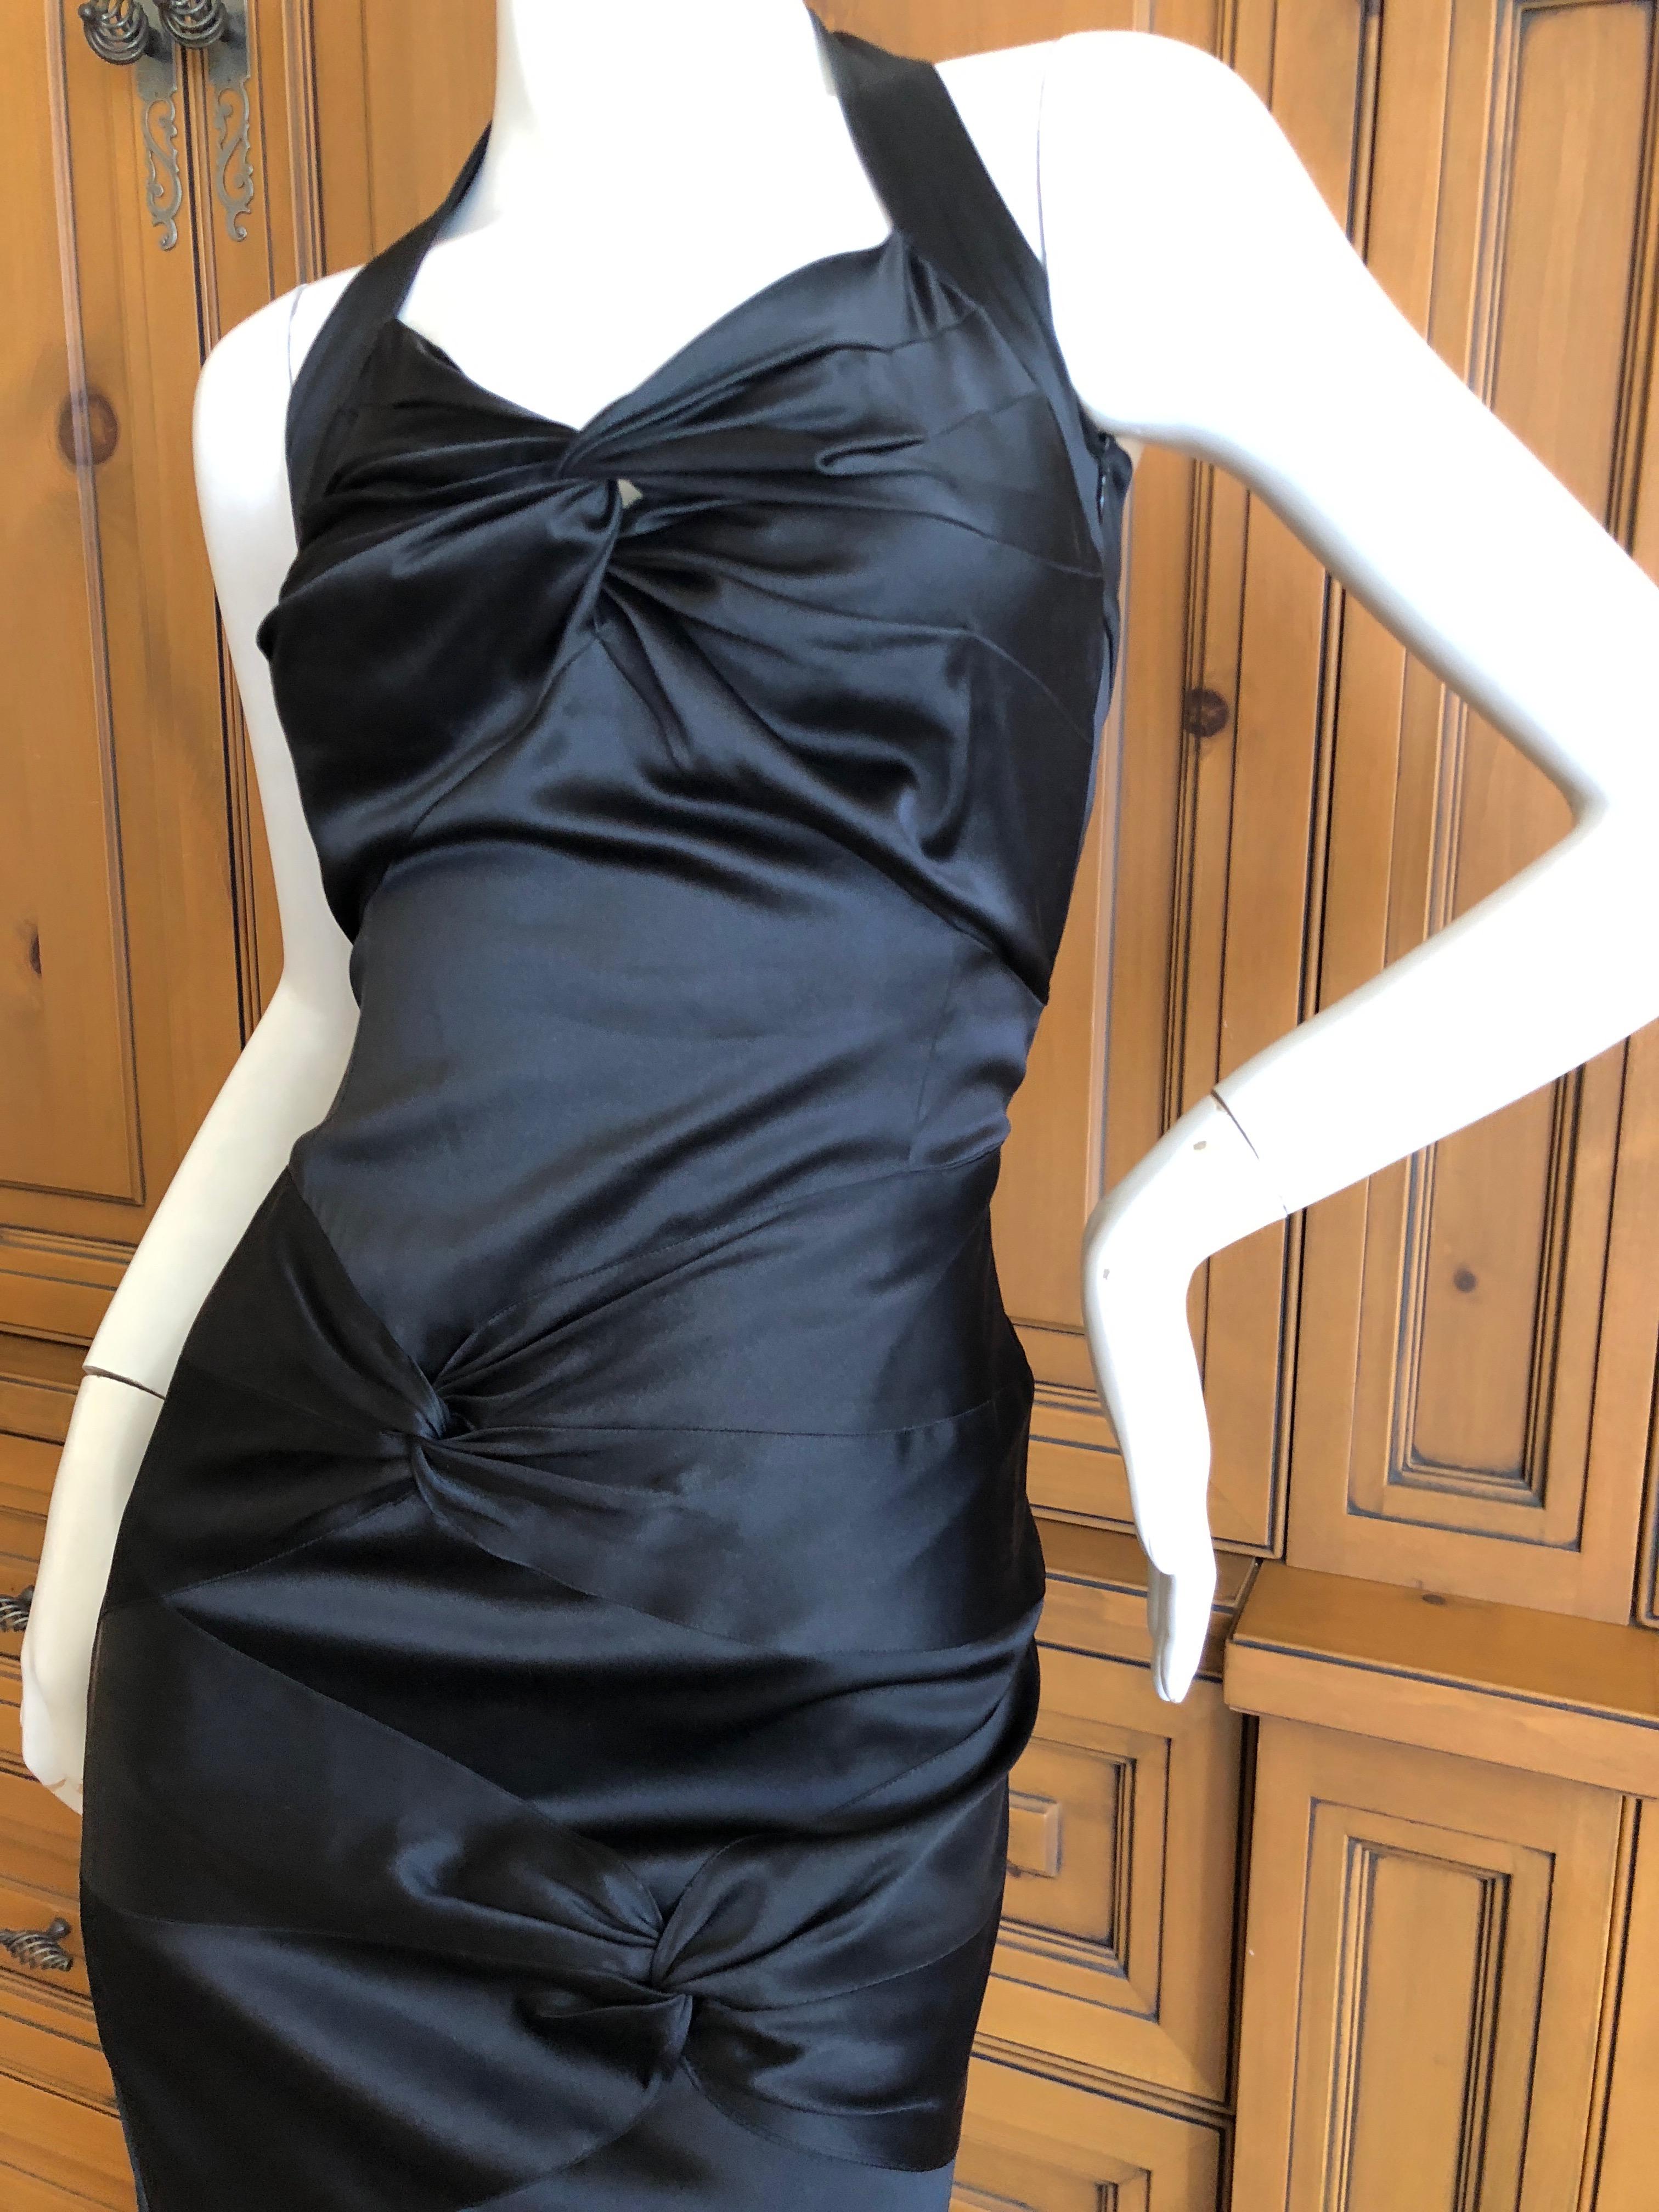 Christian Dior by John Galliano Black Silk Lined Knot Dress.
Acetate with a lot of stretch, lined in silk.
Size 40
Bust 36